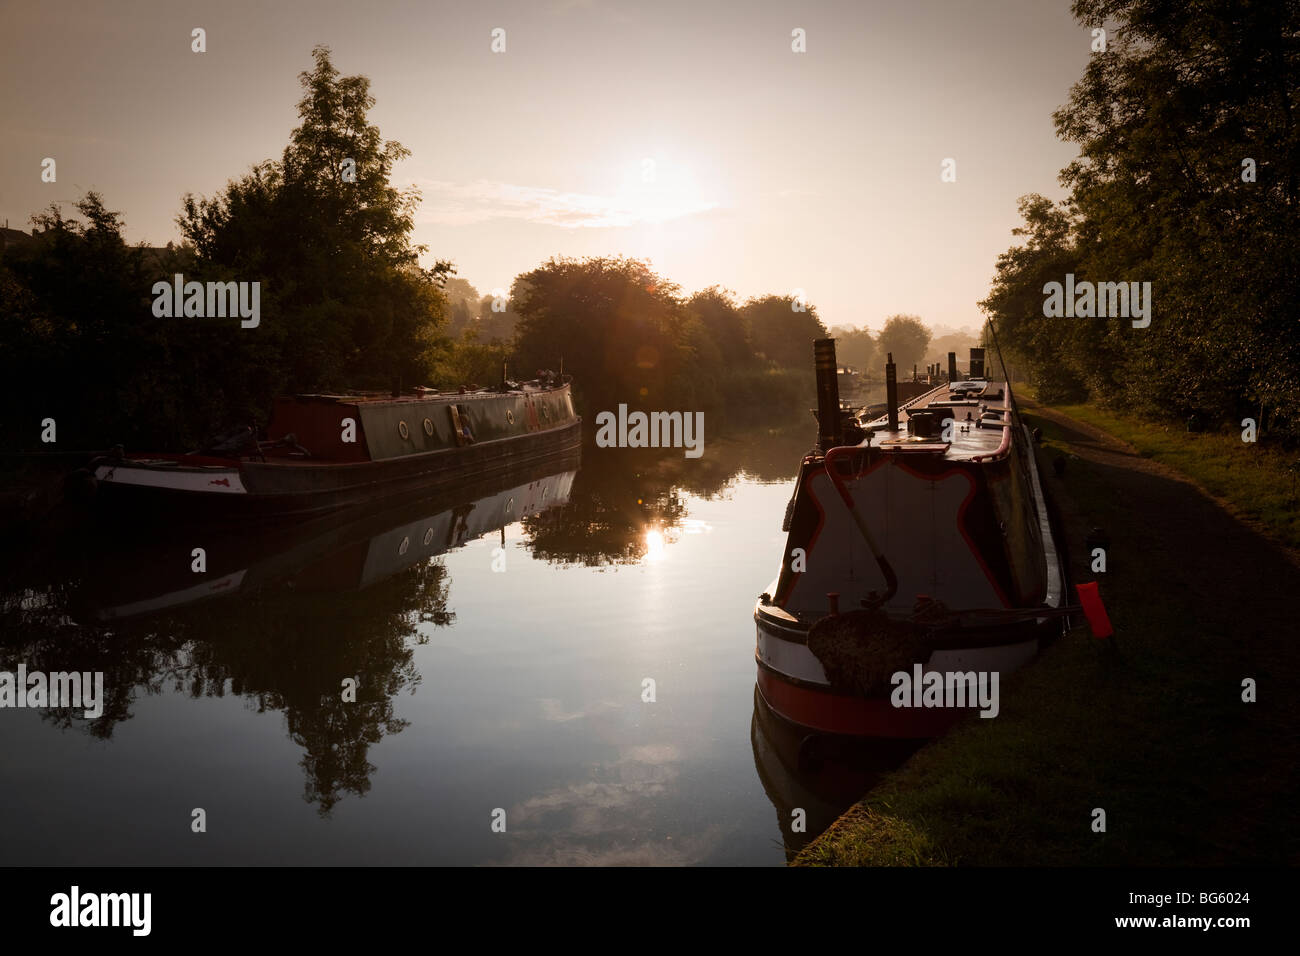 The Grand Union Canal at dawn, Braunston, Northamptonshire, England, Great Britain Stock Photo